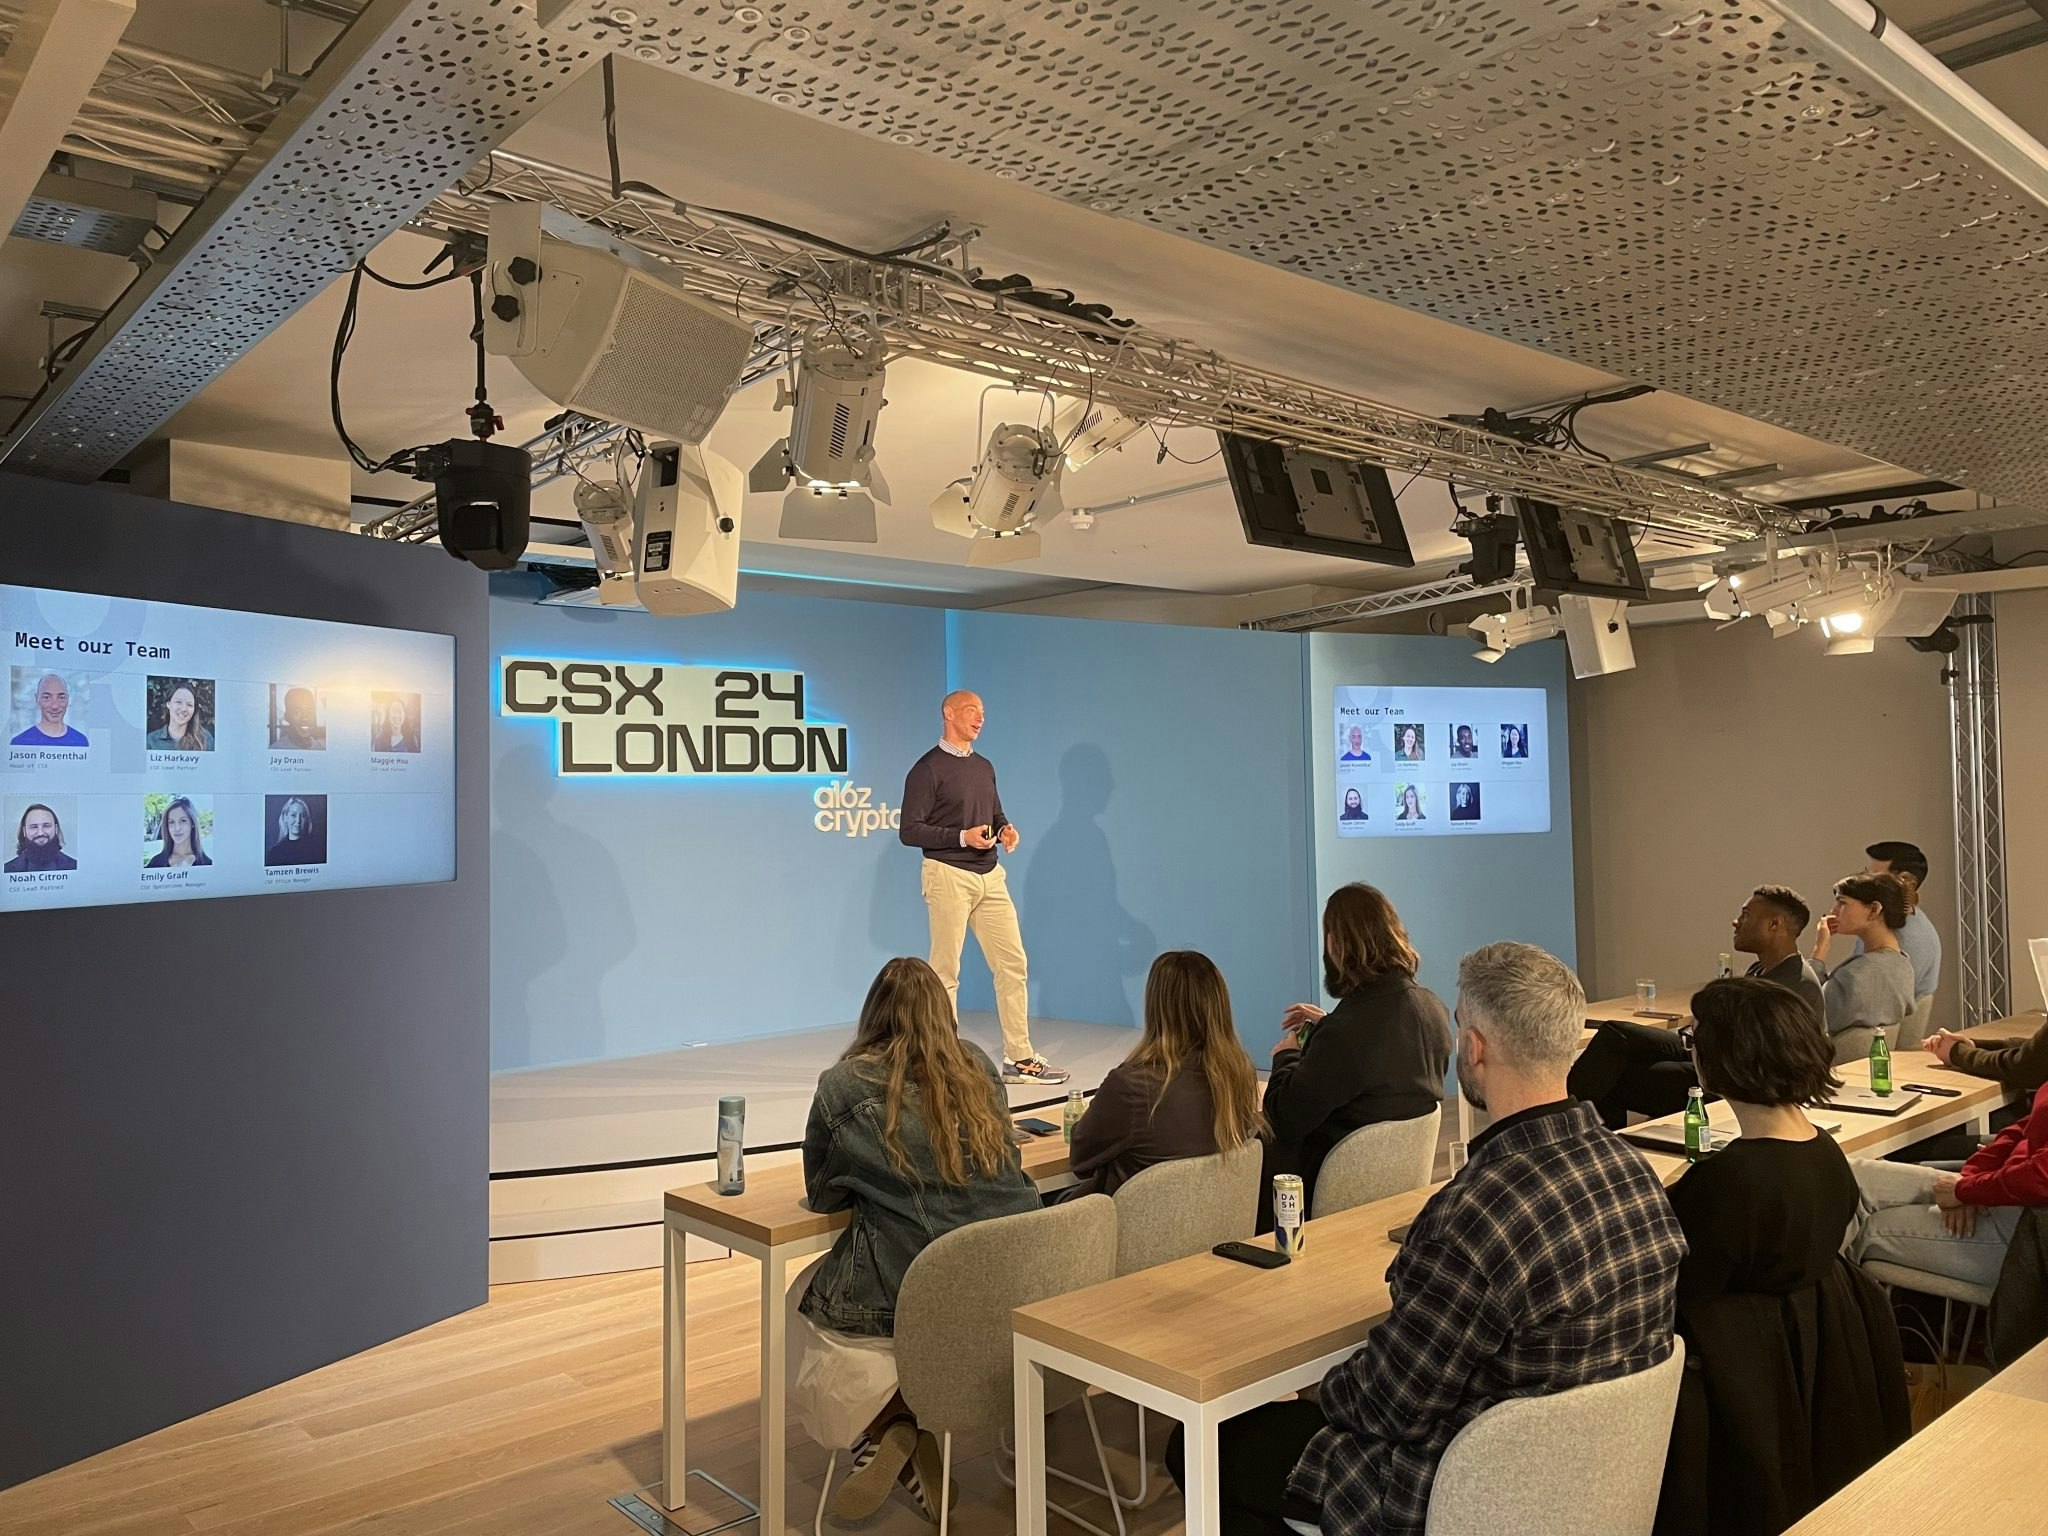 A16z partner Jason Rosenthal welcoming the startups to London.